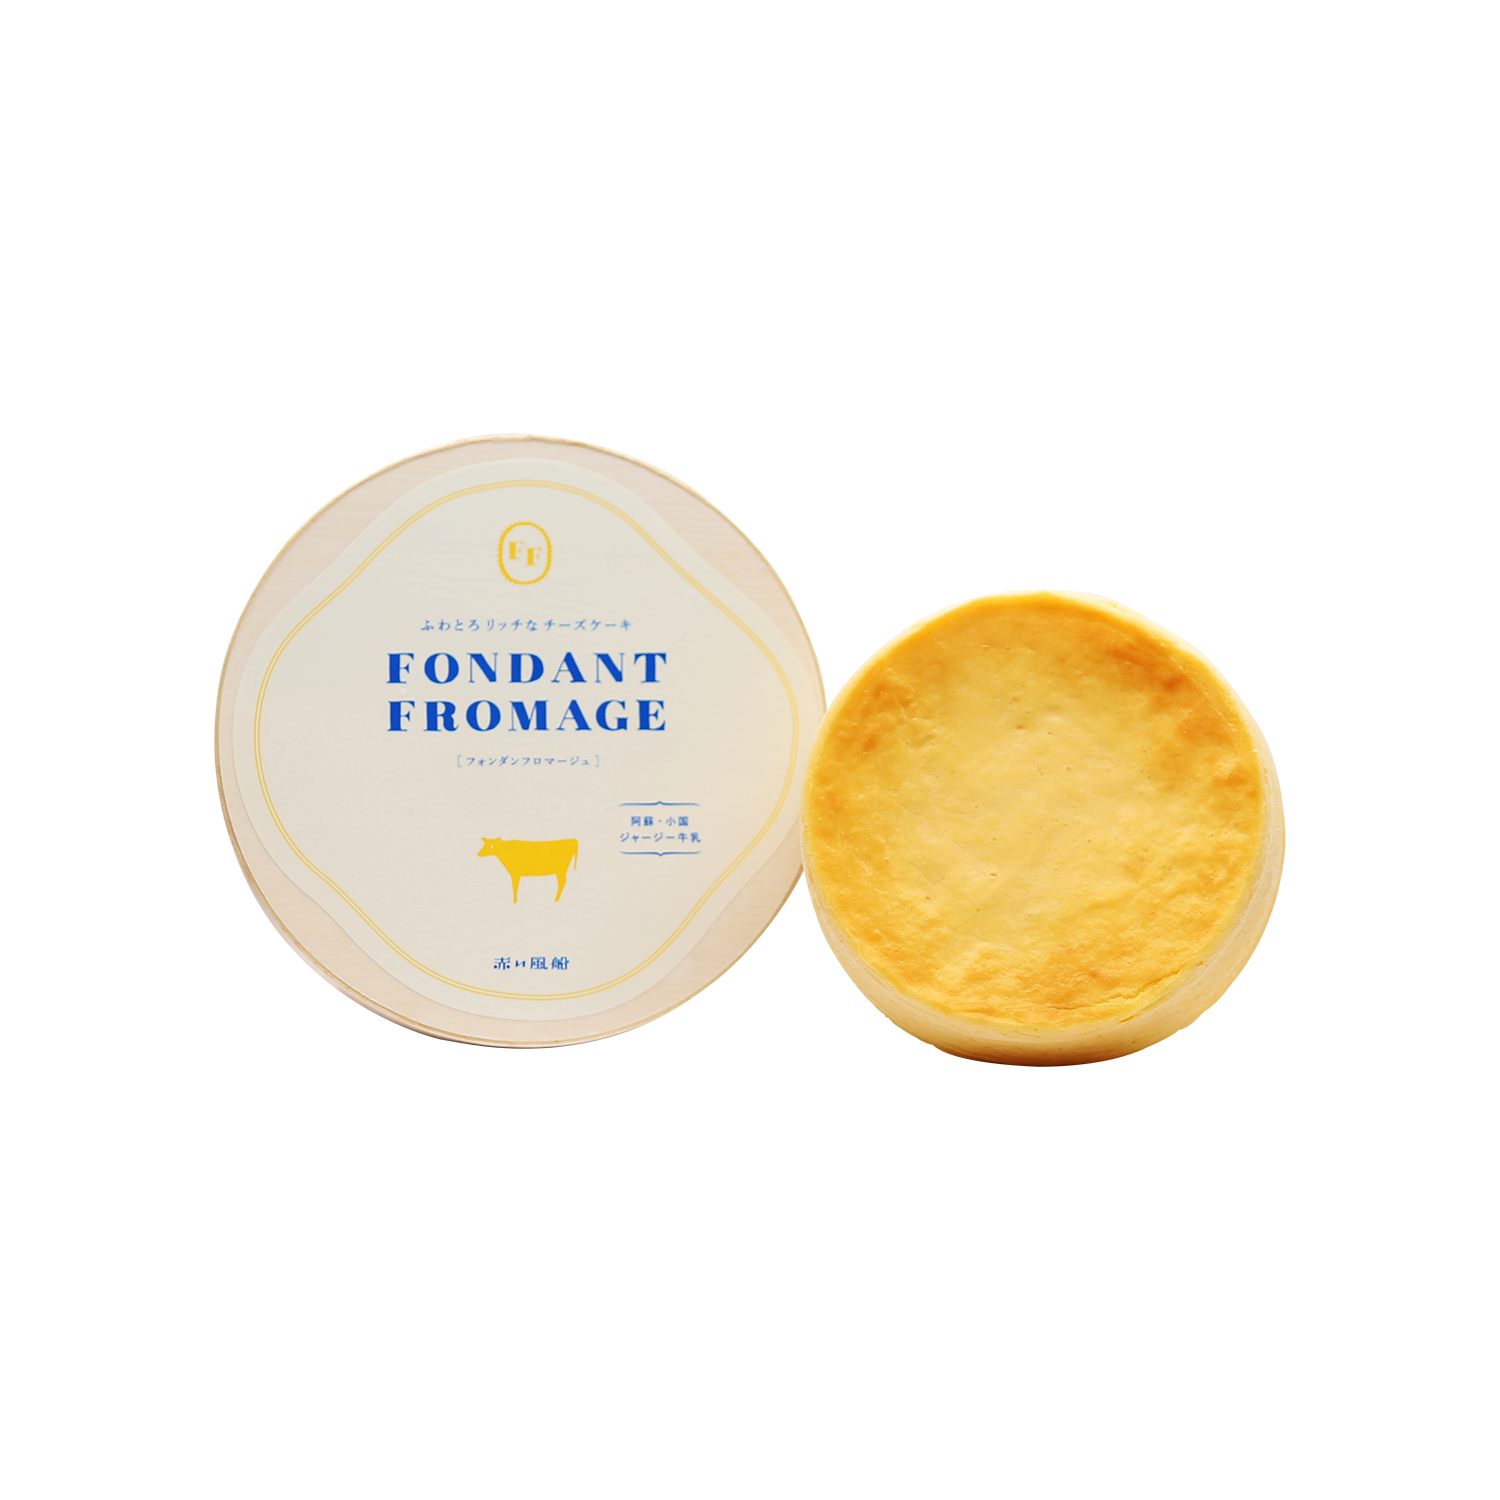 Fondant Fromage - Gold Quality Award 2023 from Monde Selection